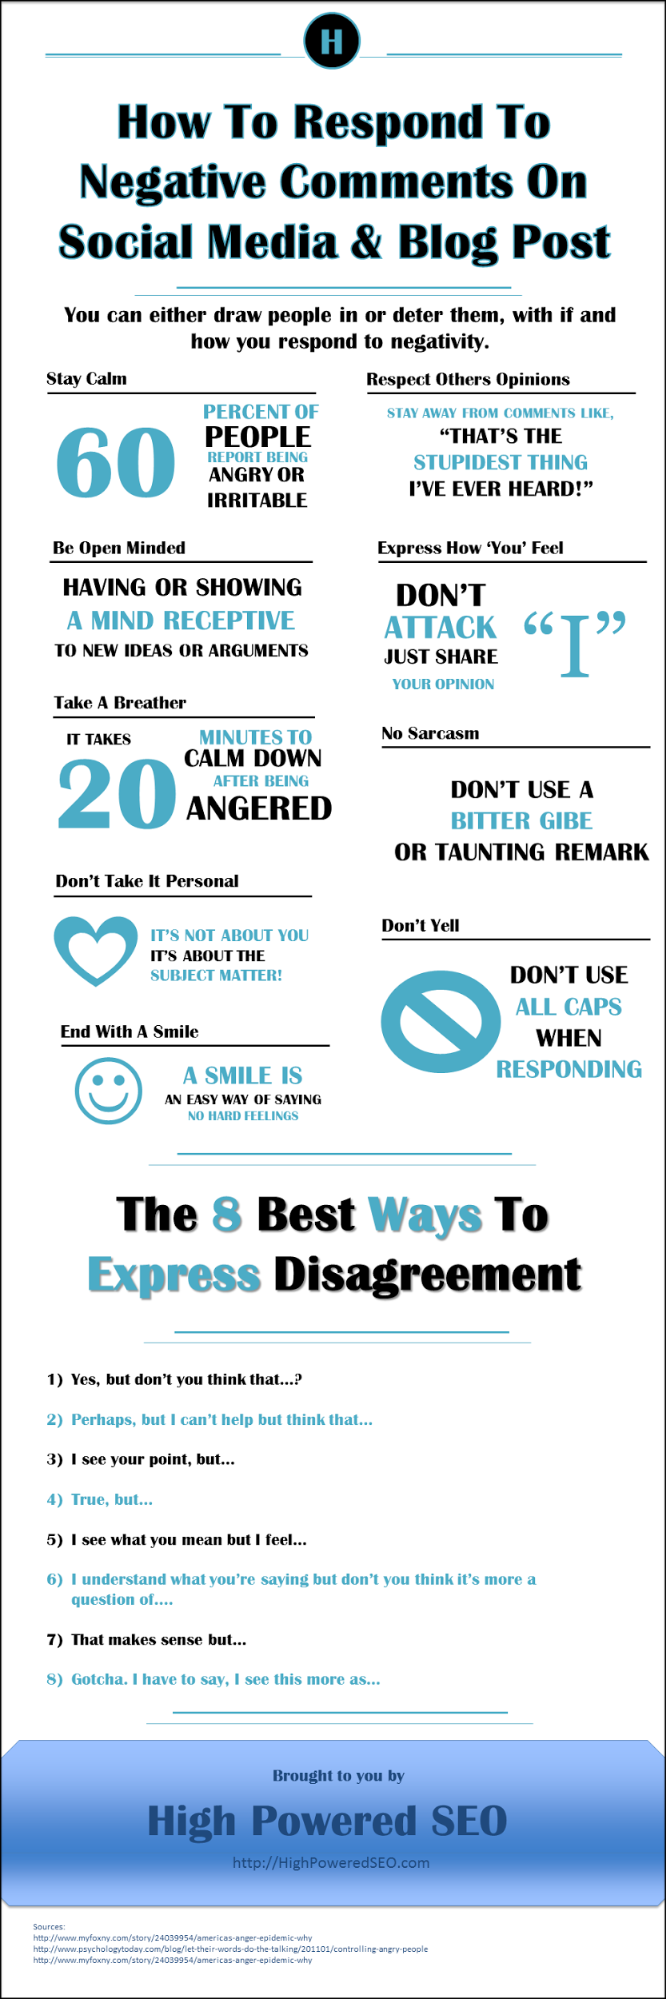 RESPOND TO NEGATIVE COMMENTS ON SOCIAL MEDIA AND BLOG POSTS INFOGRAPHIC